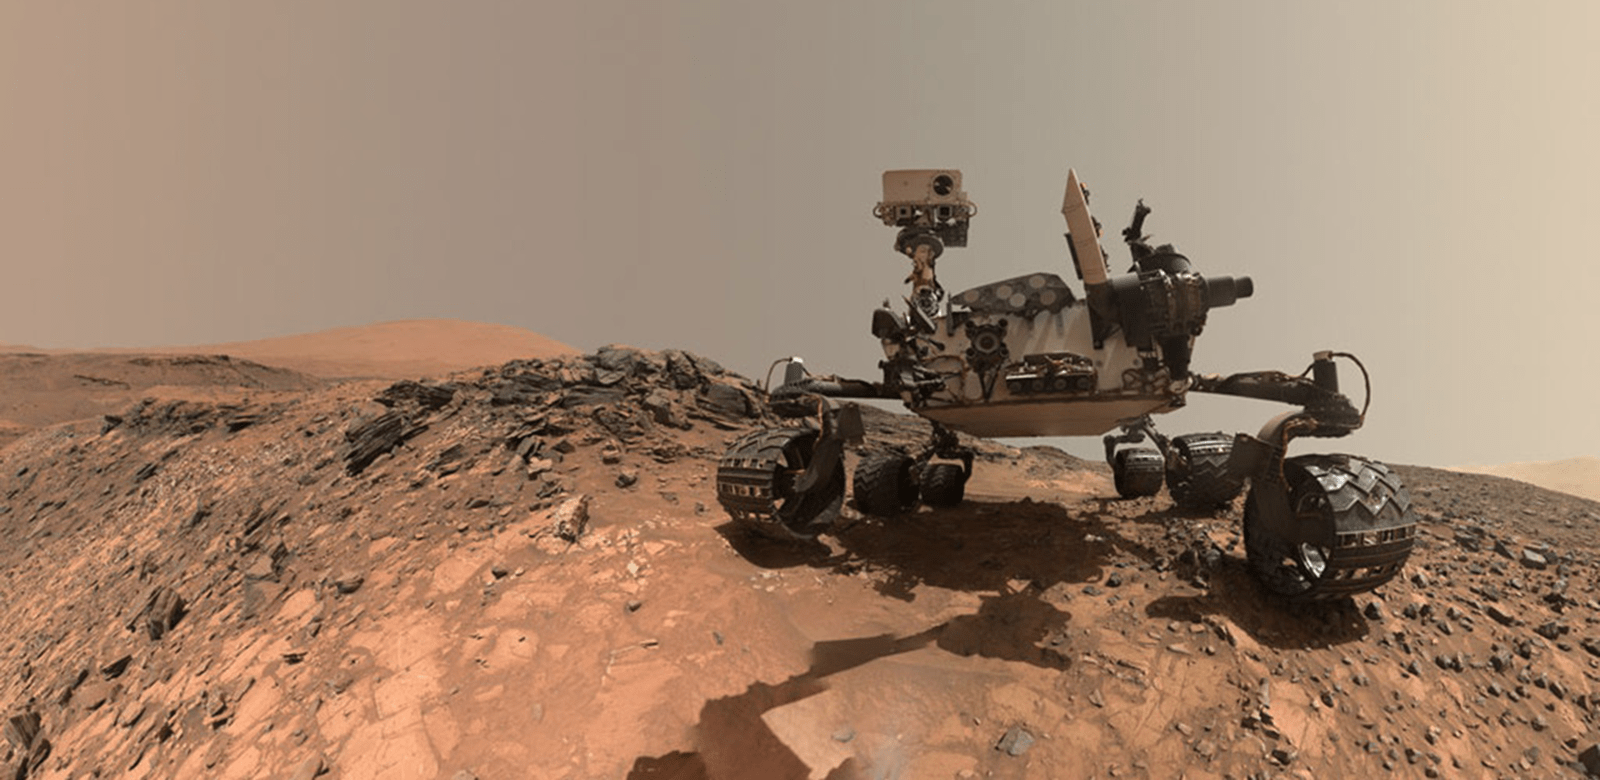 The rover called Perseverance on Mars